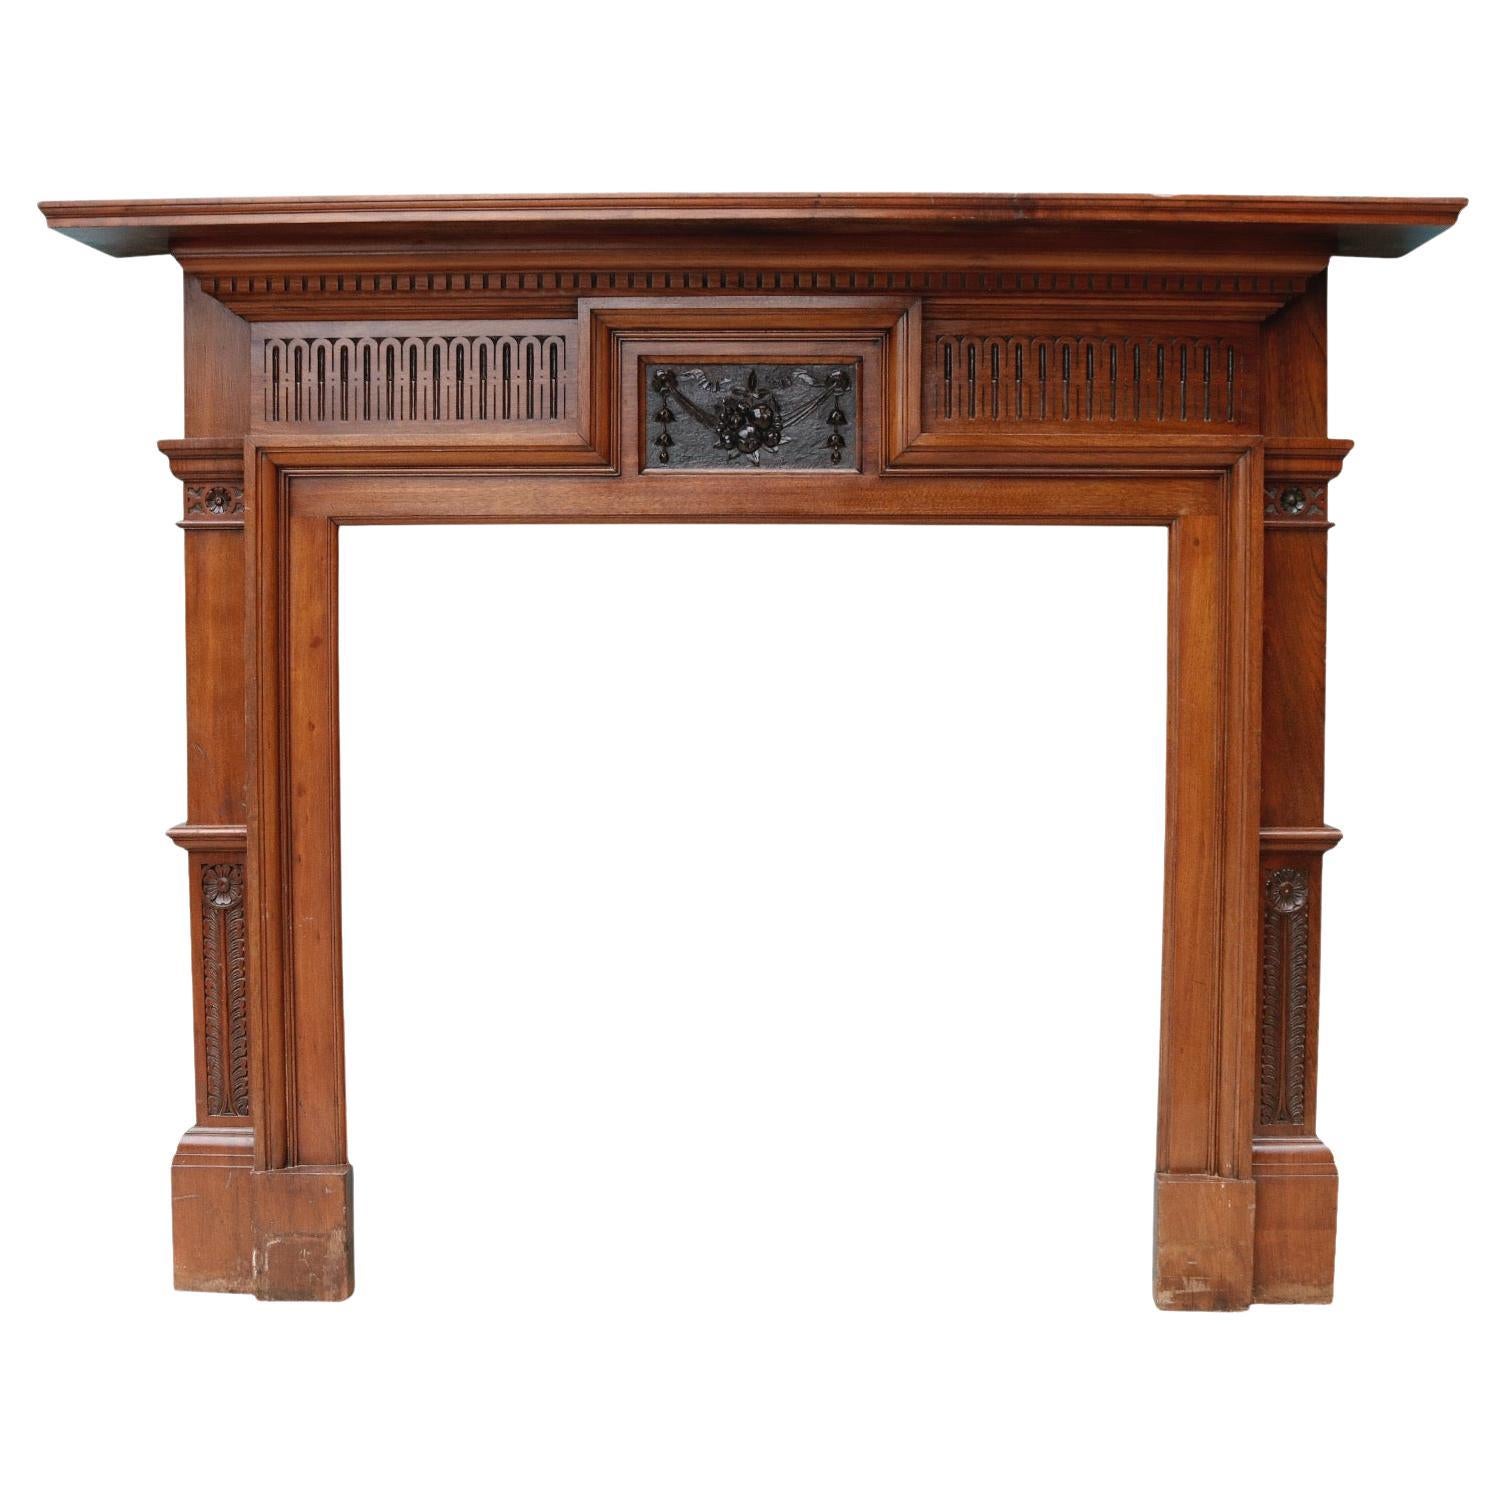 Antique Arts and Crafts Style Walnut Mantel